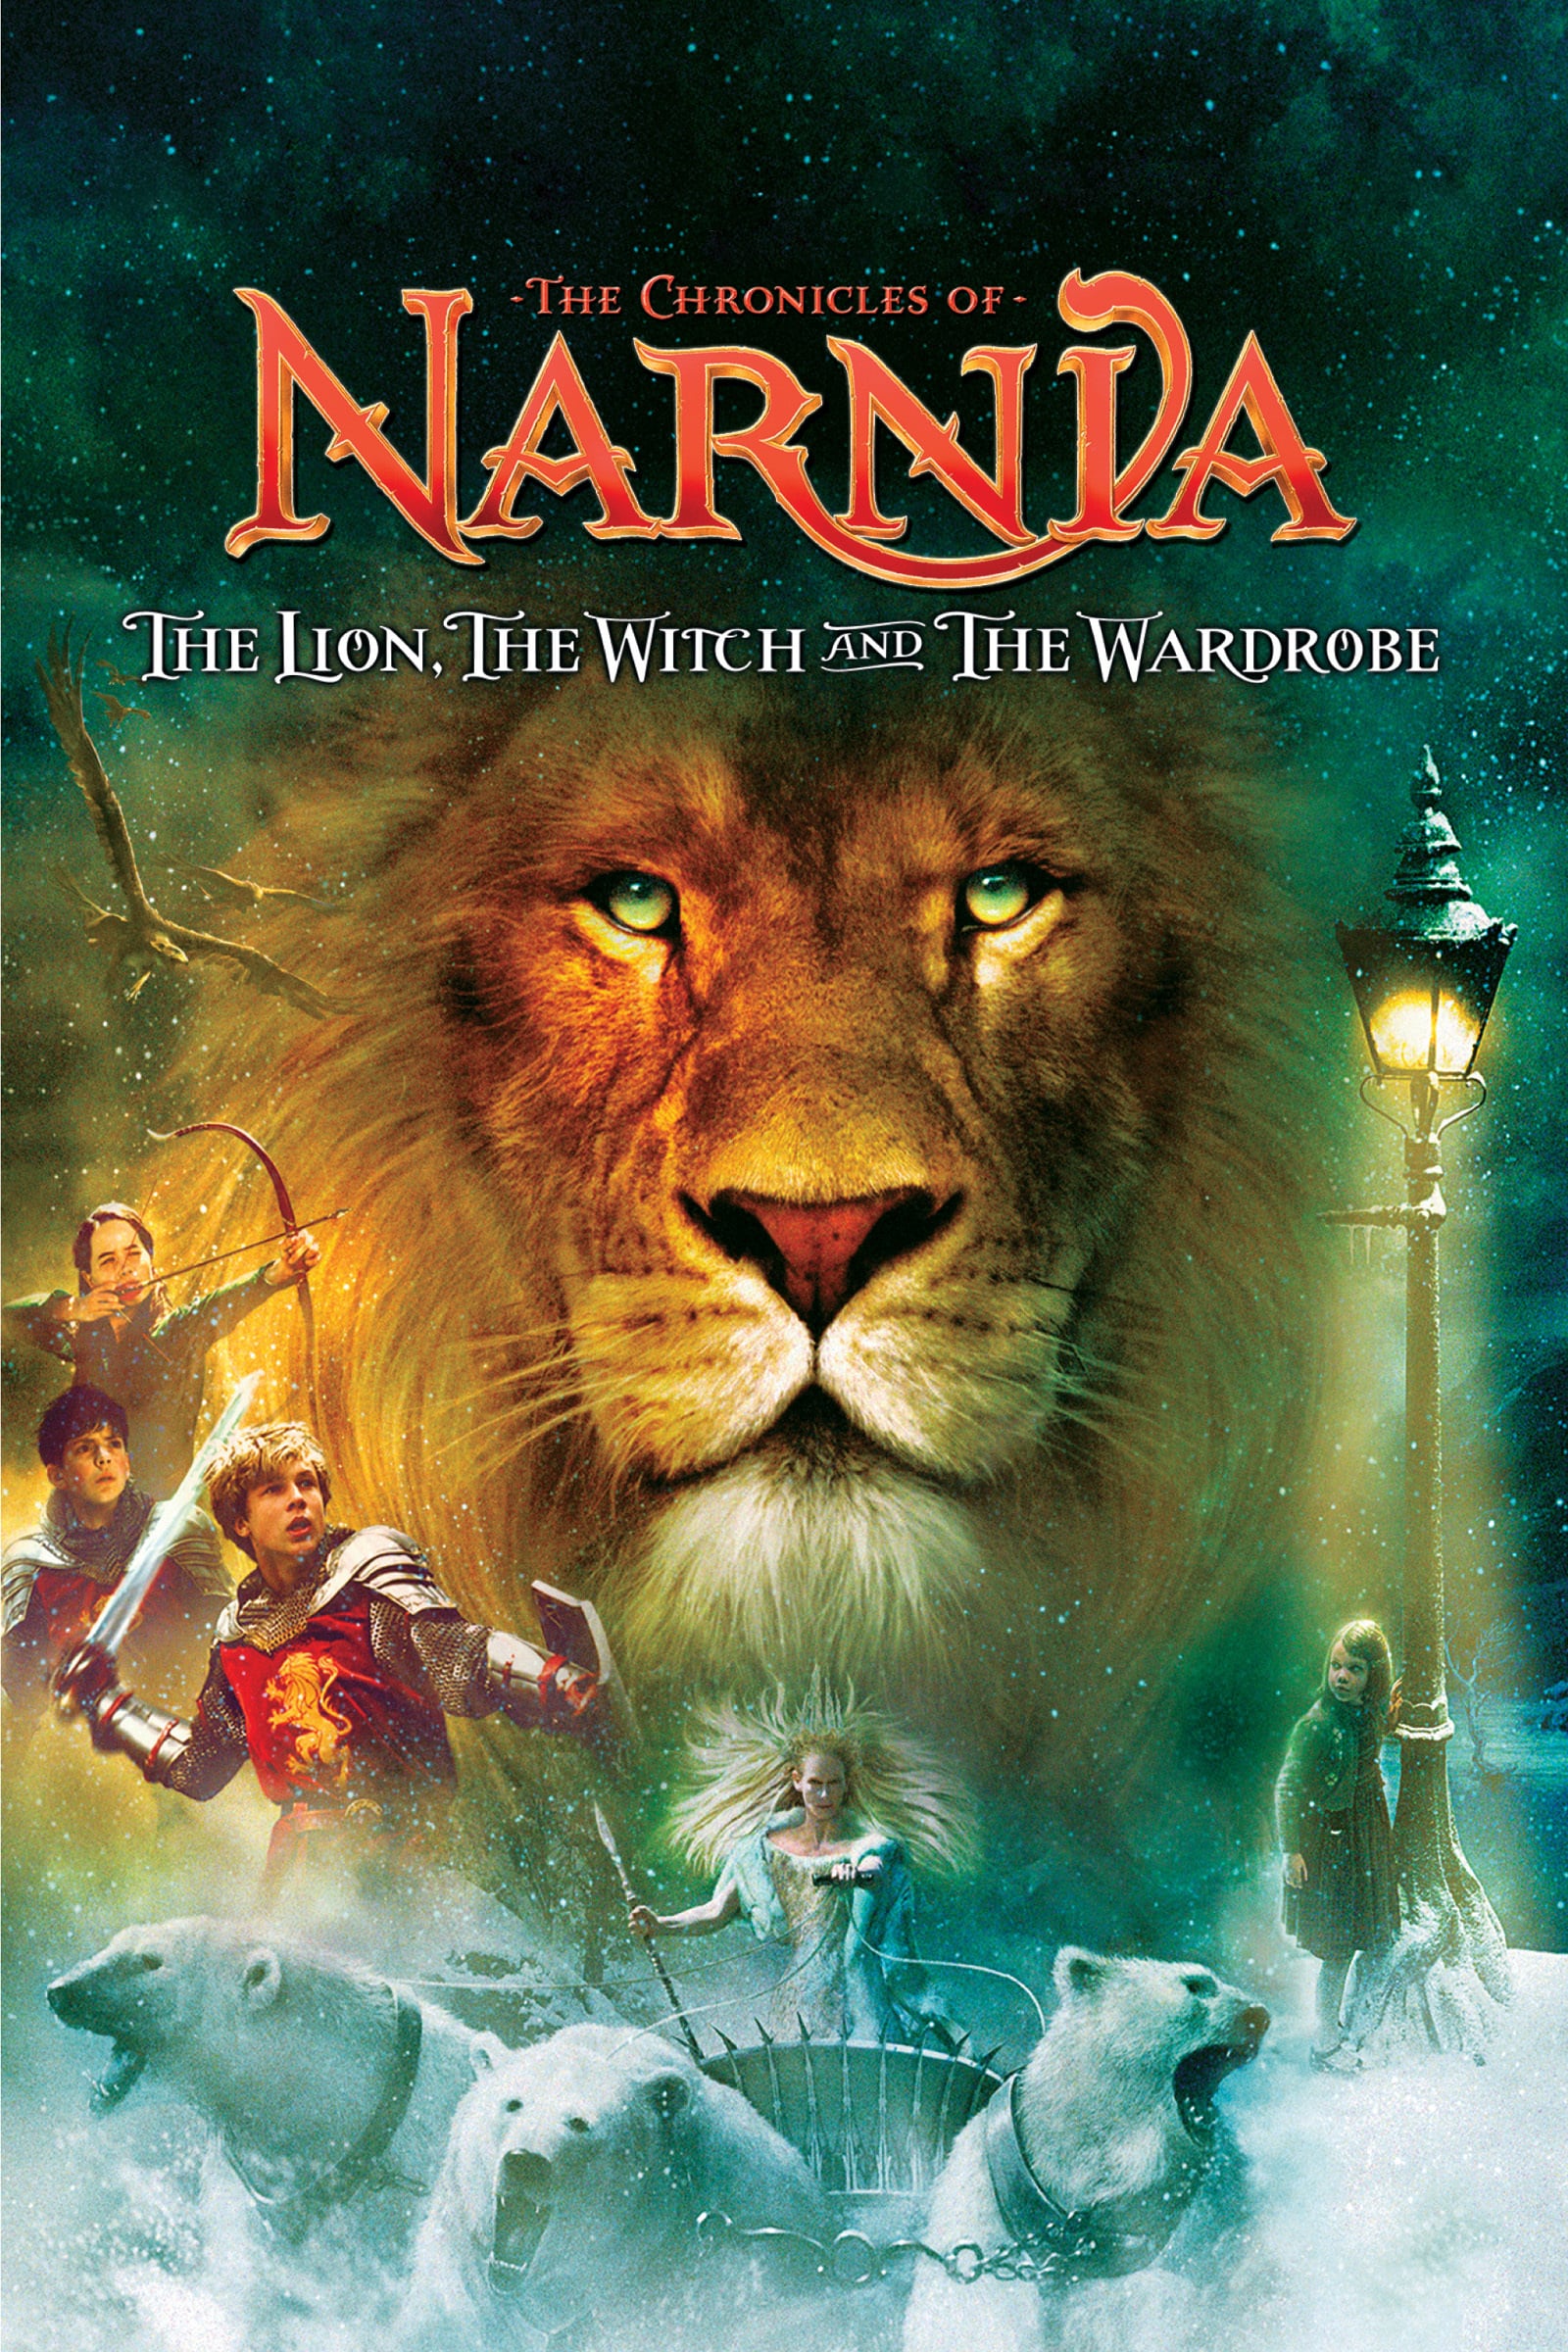 Poster for the movie "The Chronicles of Narnia: The Lion, the Witch and the Wardrobe"